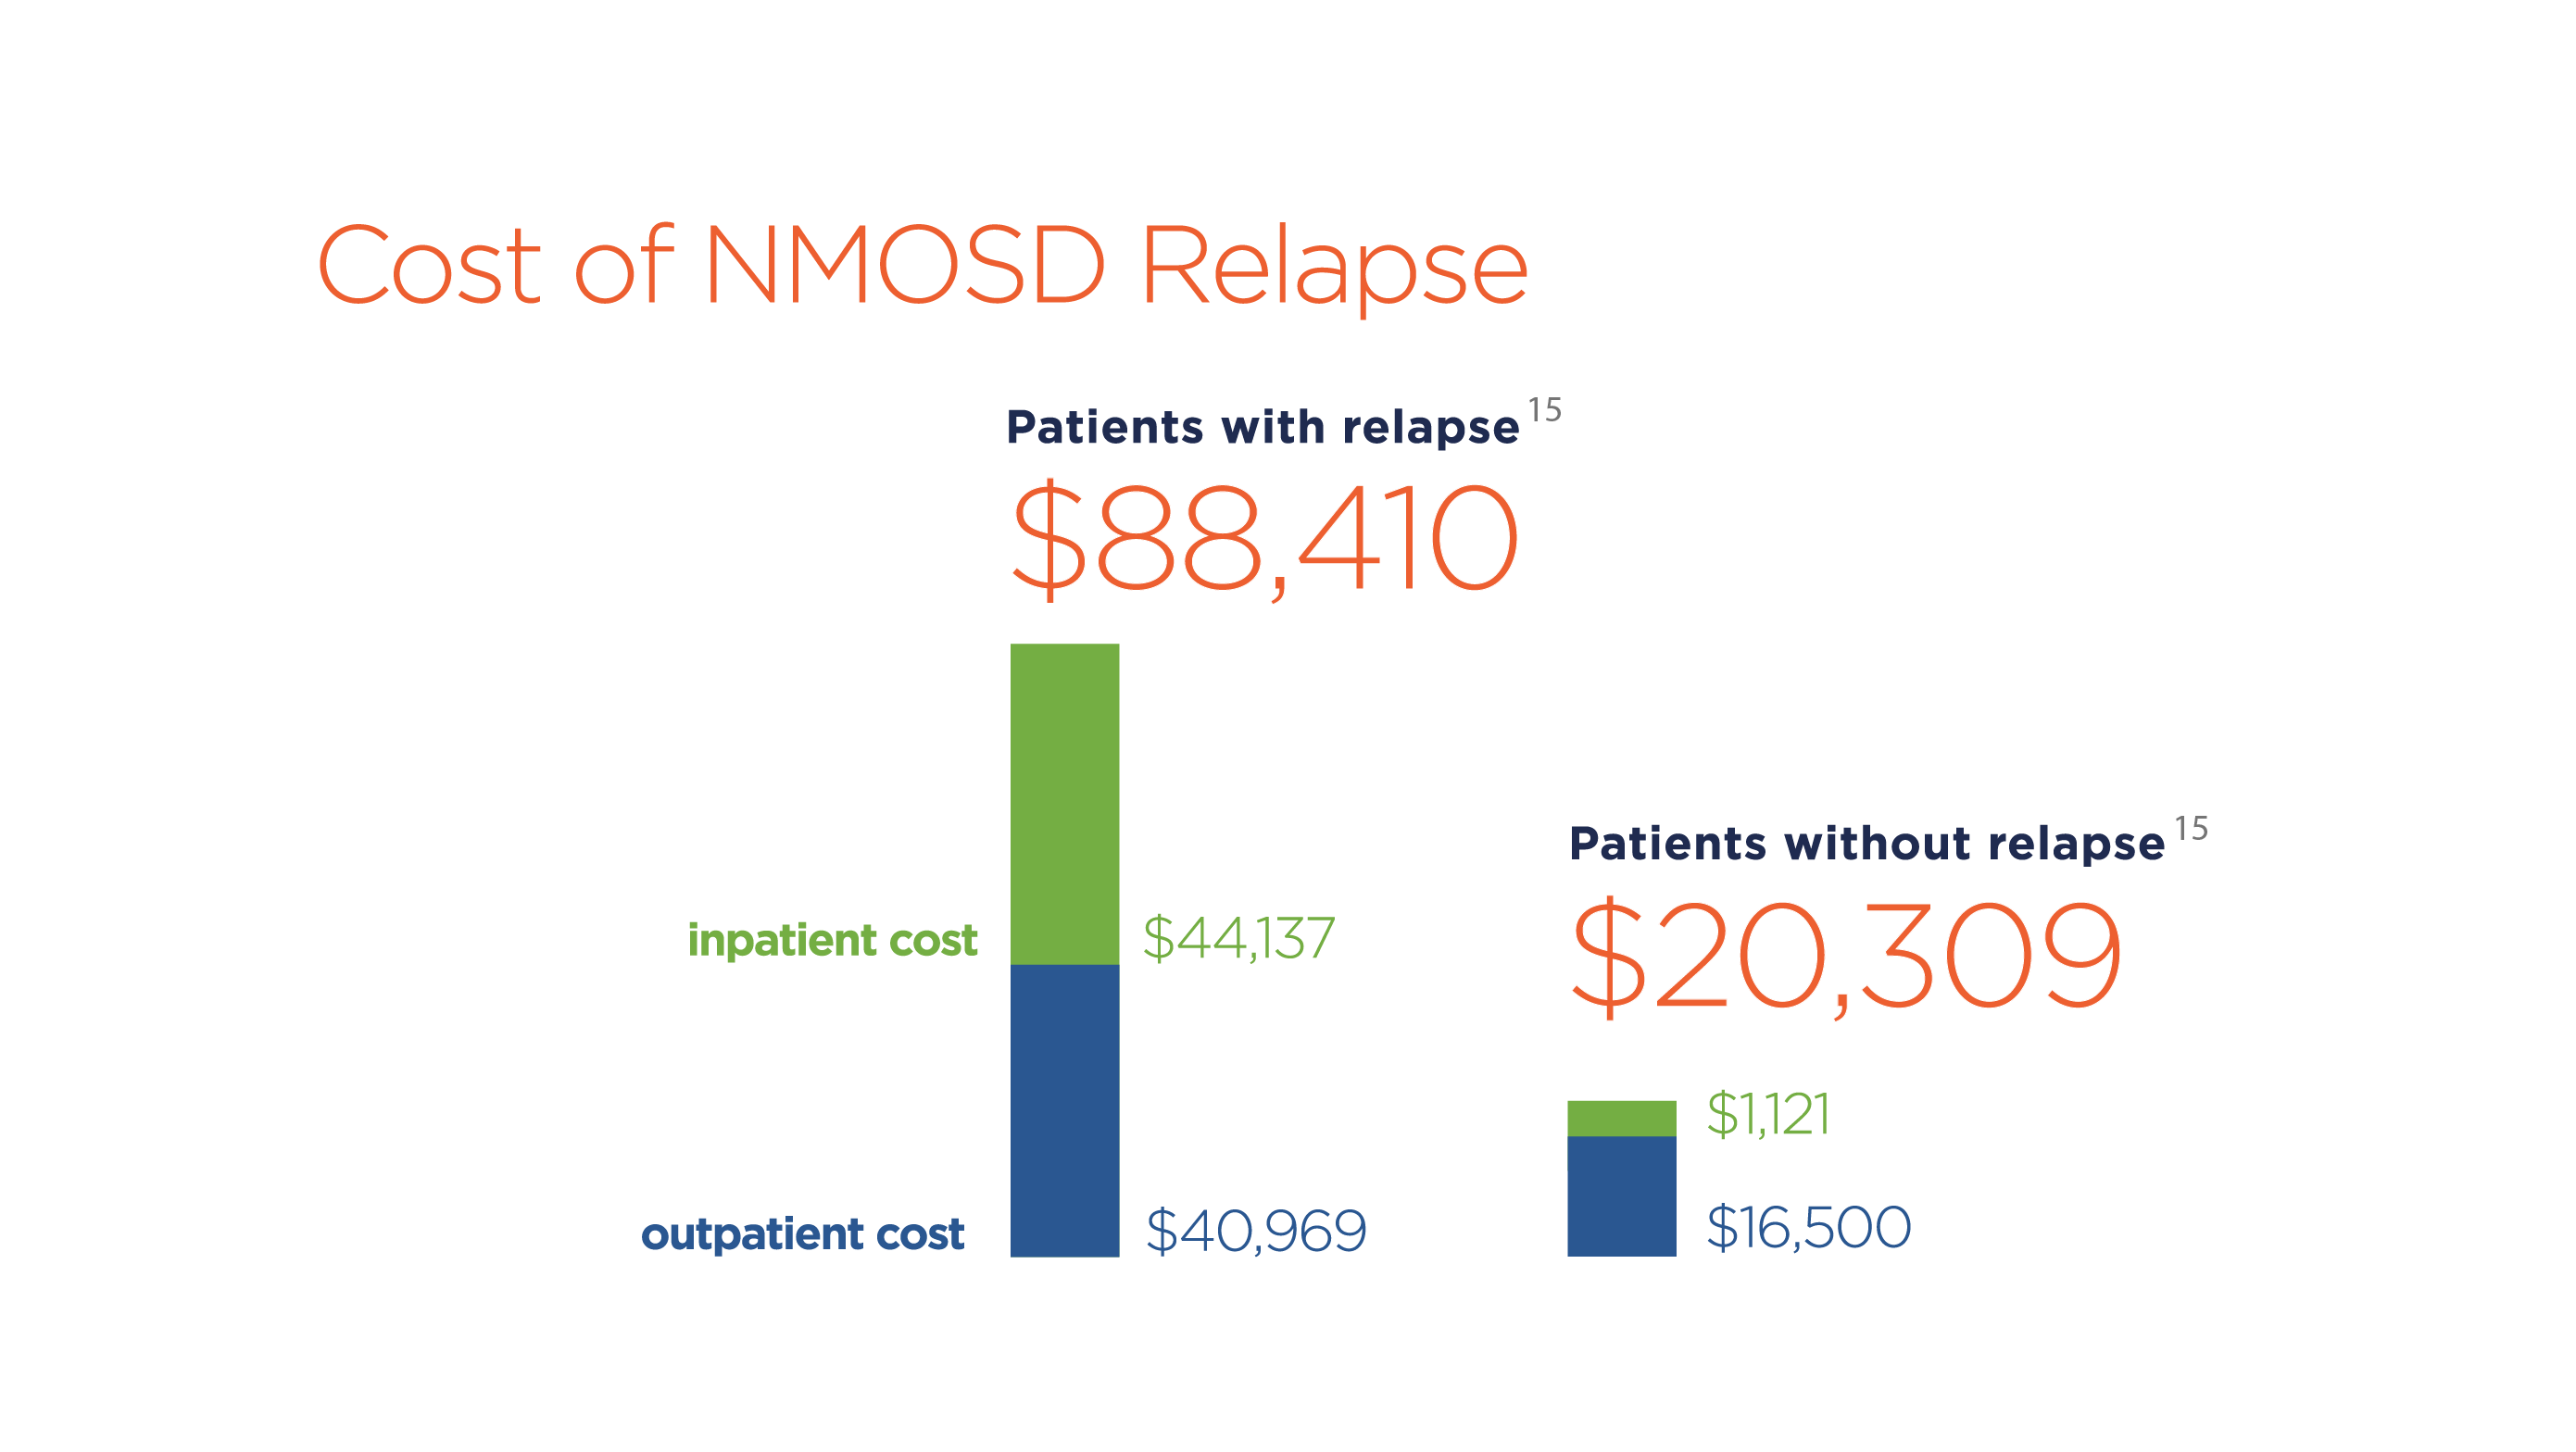 Individuals with NMOSD who experience a relapse have four times the direct medical costs as those who do not relapse.<sup>15</sup>